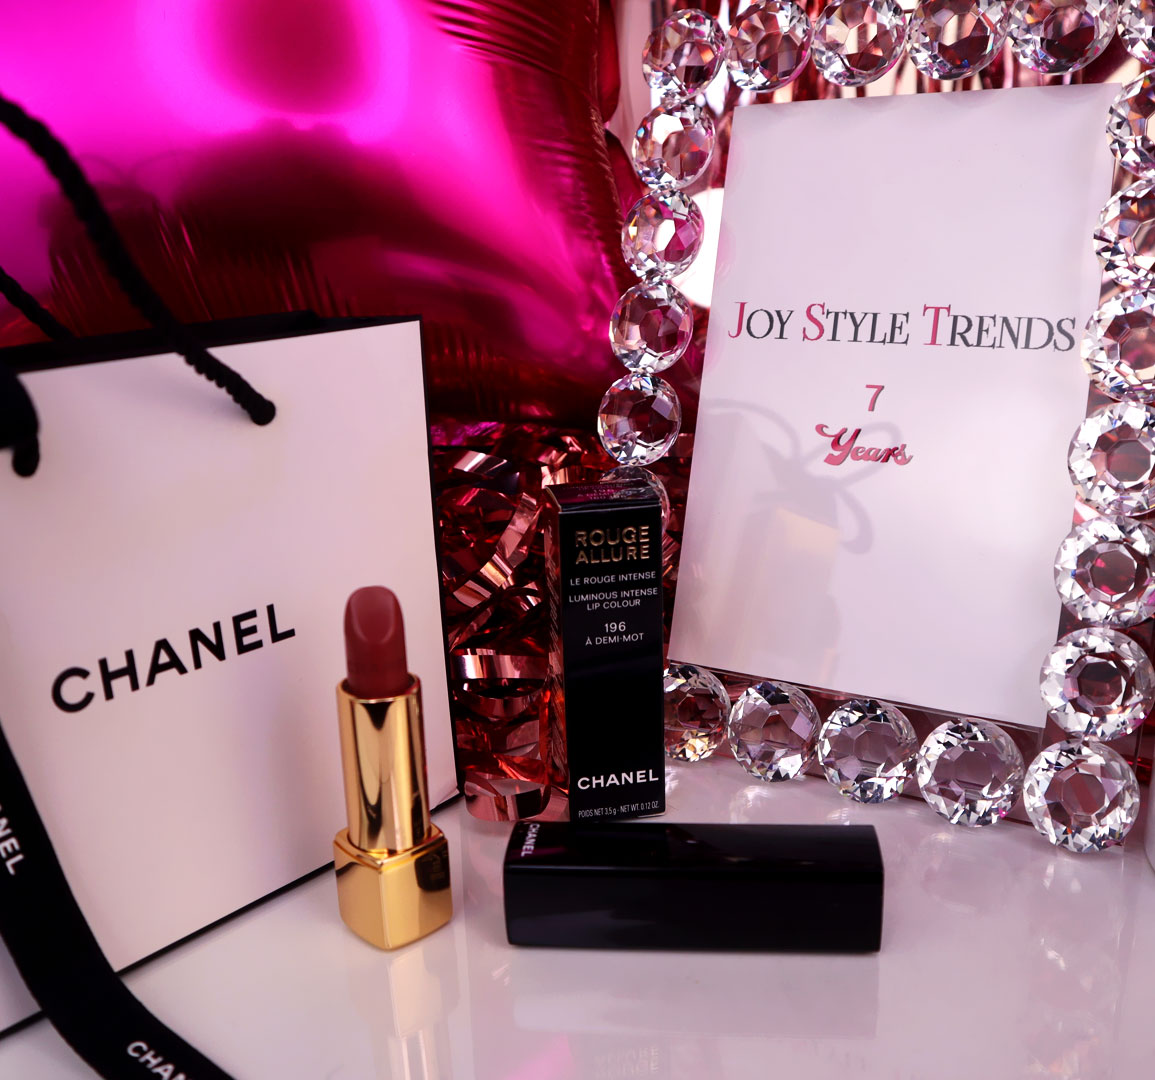 Joy Style Trends 7th Anniversary Photo Frame and CHANEL Rouge Allure 196 A Demi-Mot, Photo Of Joy Style Trends Media